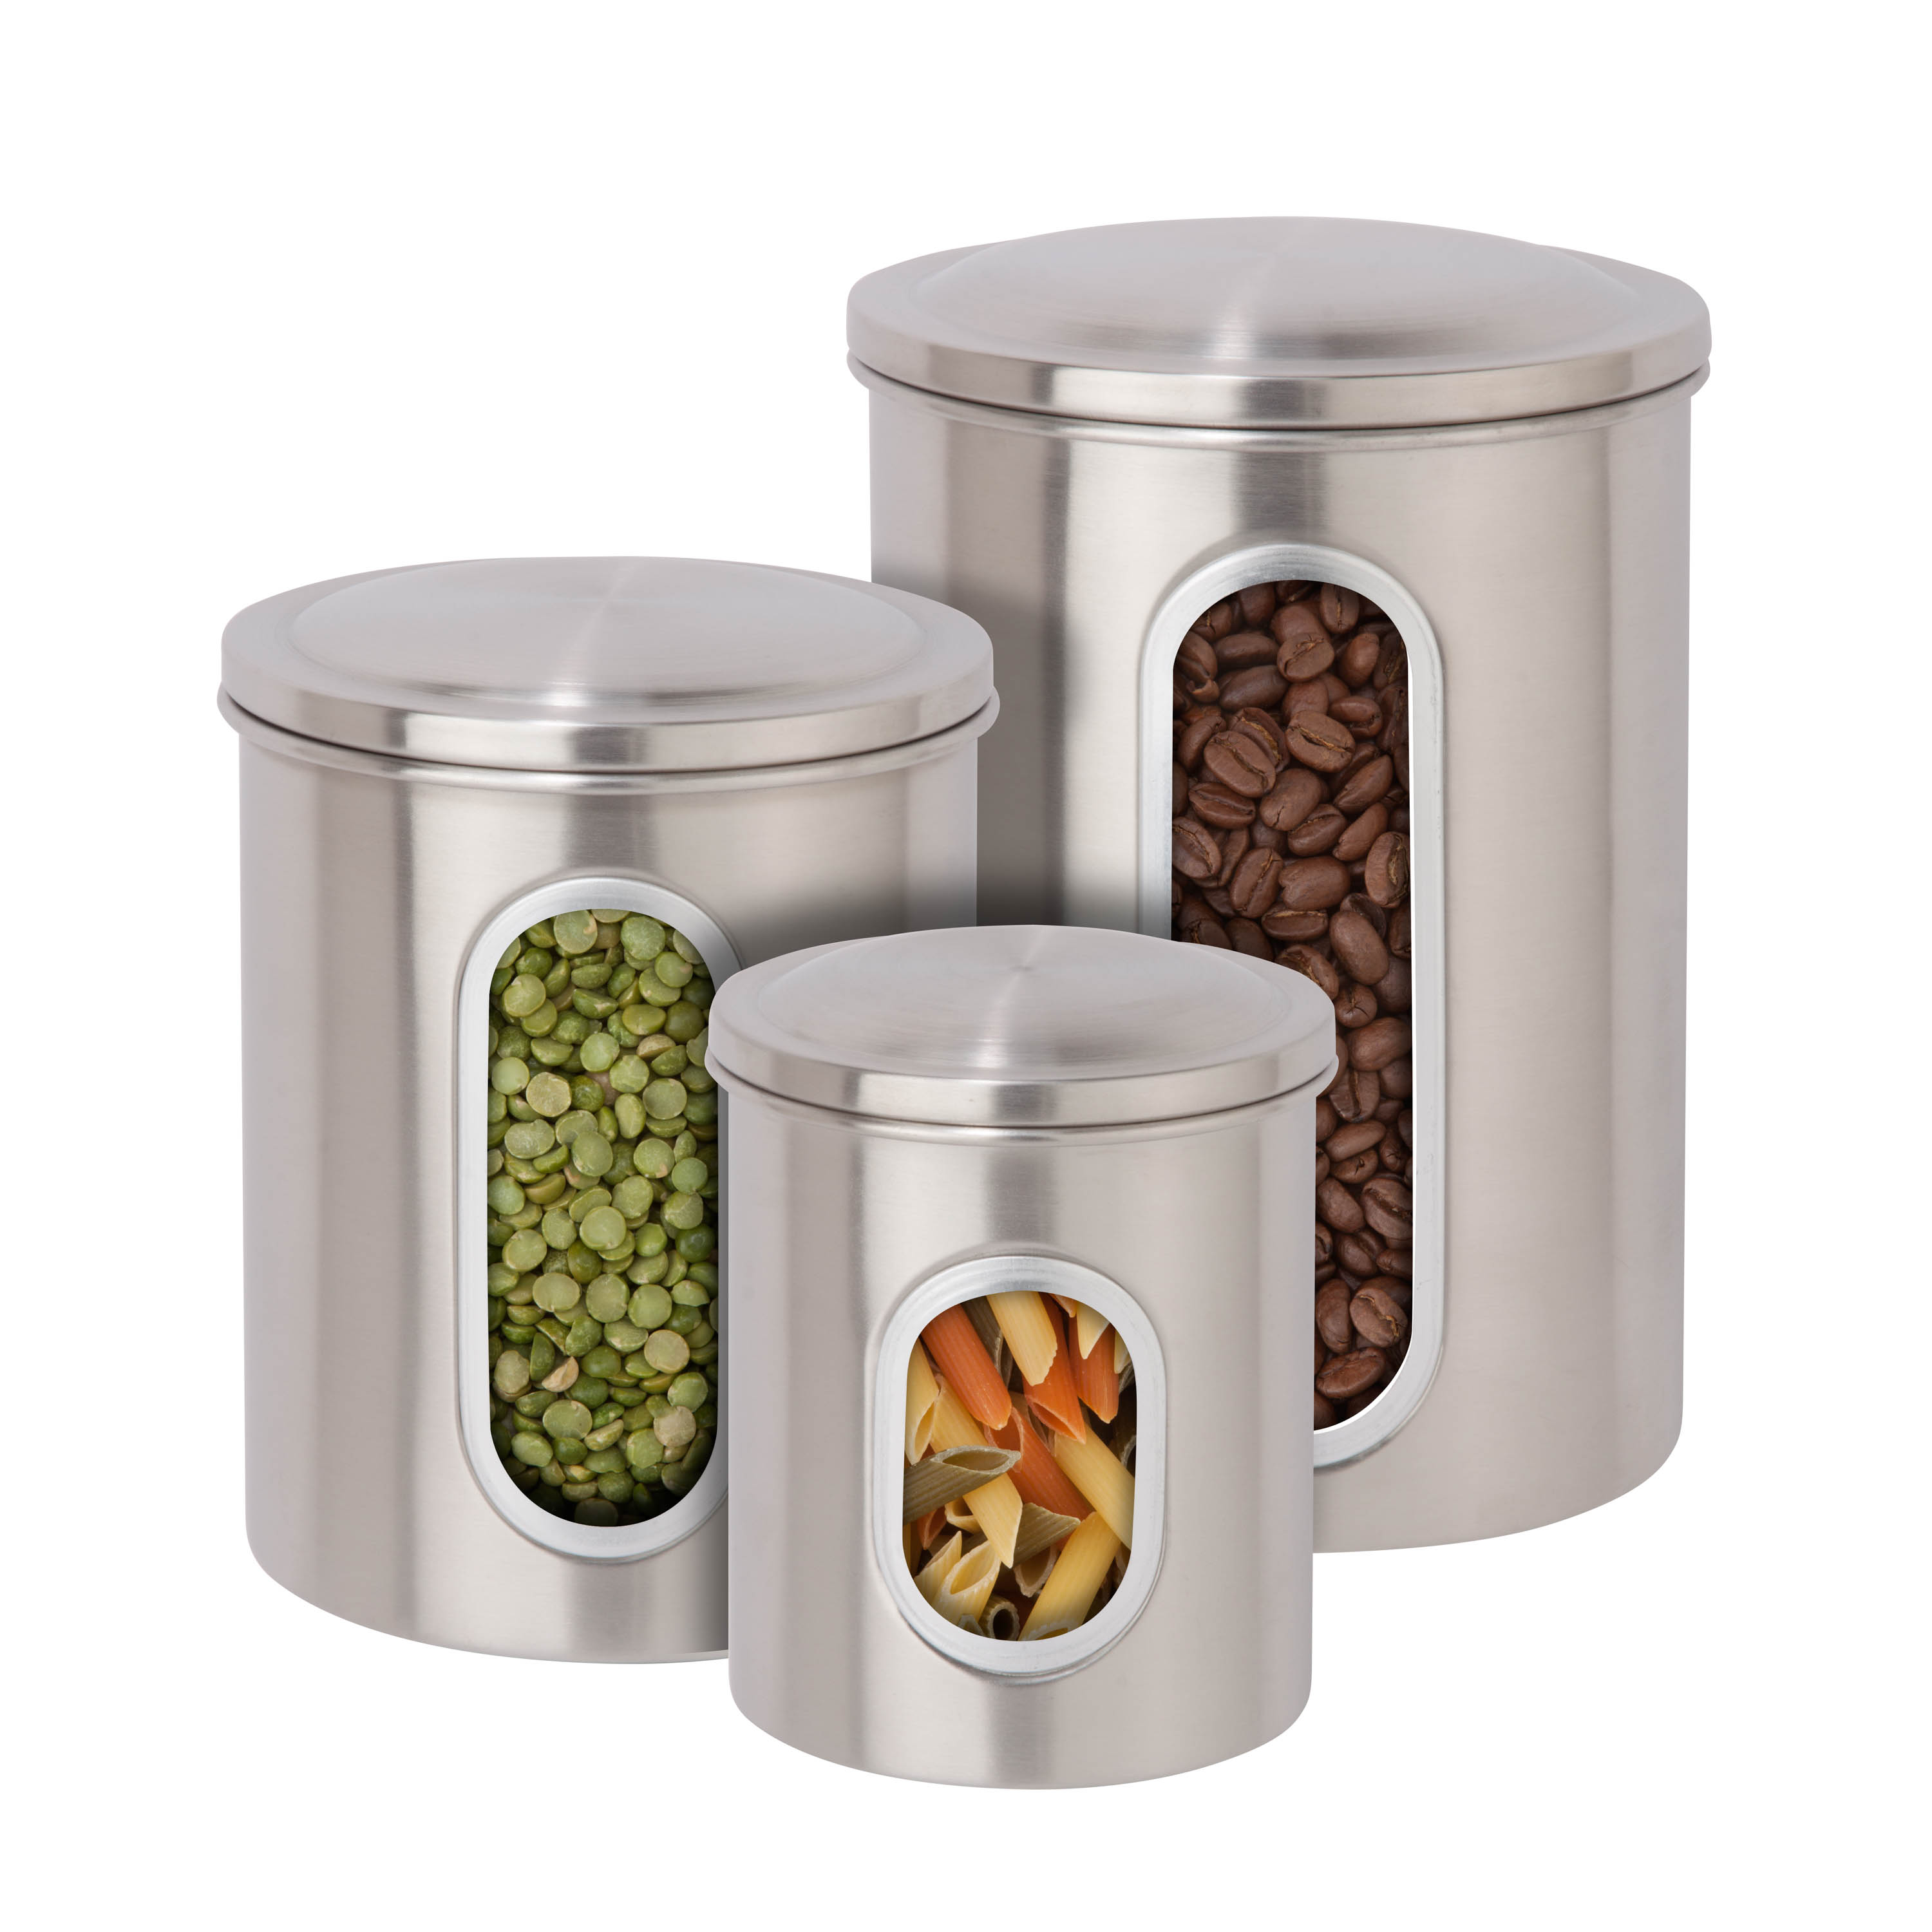 Honey-Can-Do Stainless Steel 3-Piece Nesting Kitchen Canister Set, Silver - image 2 of 5